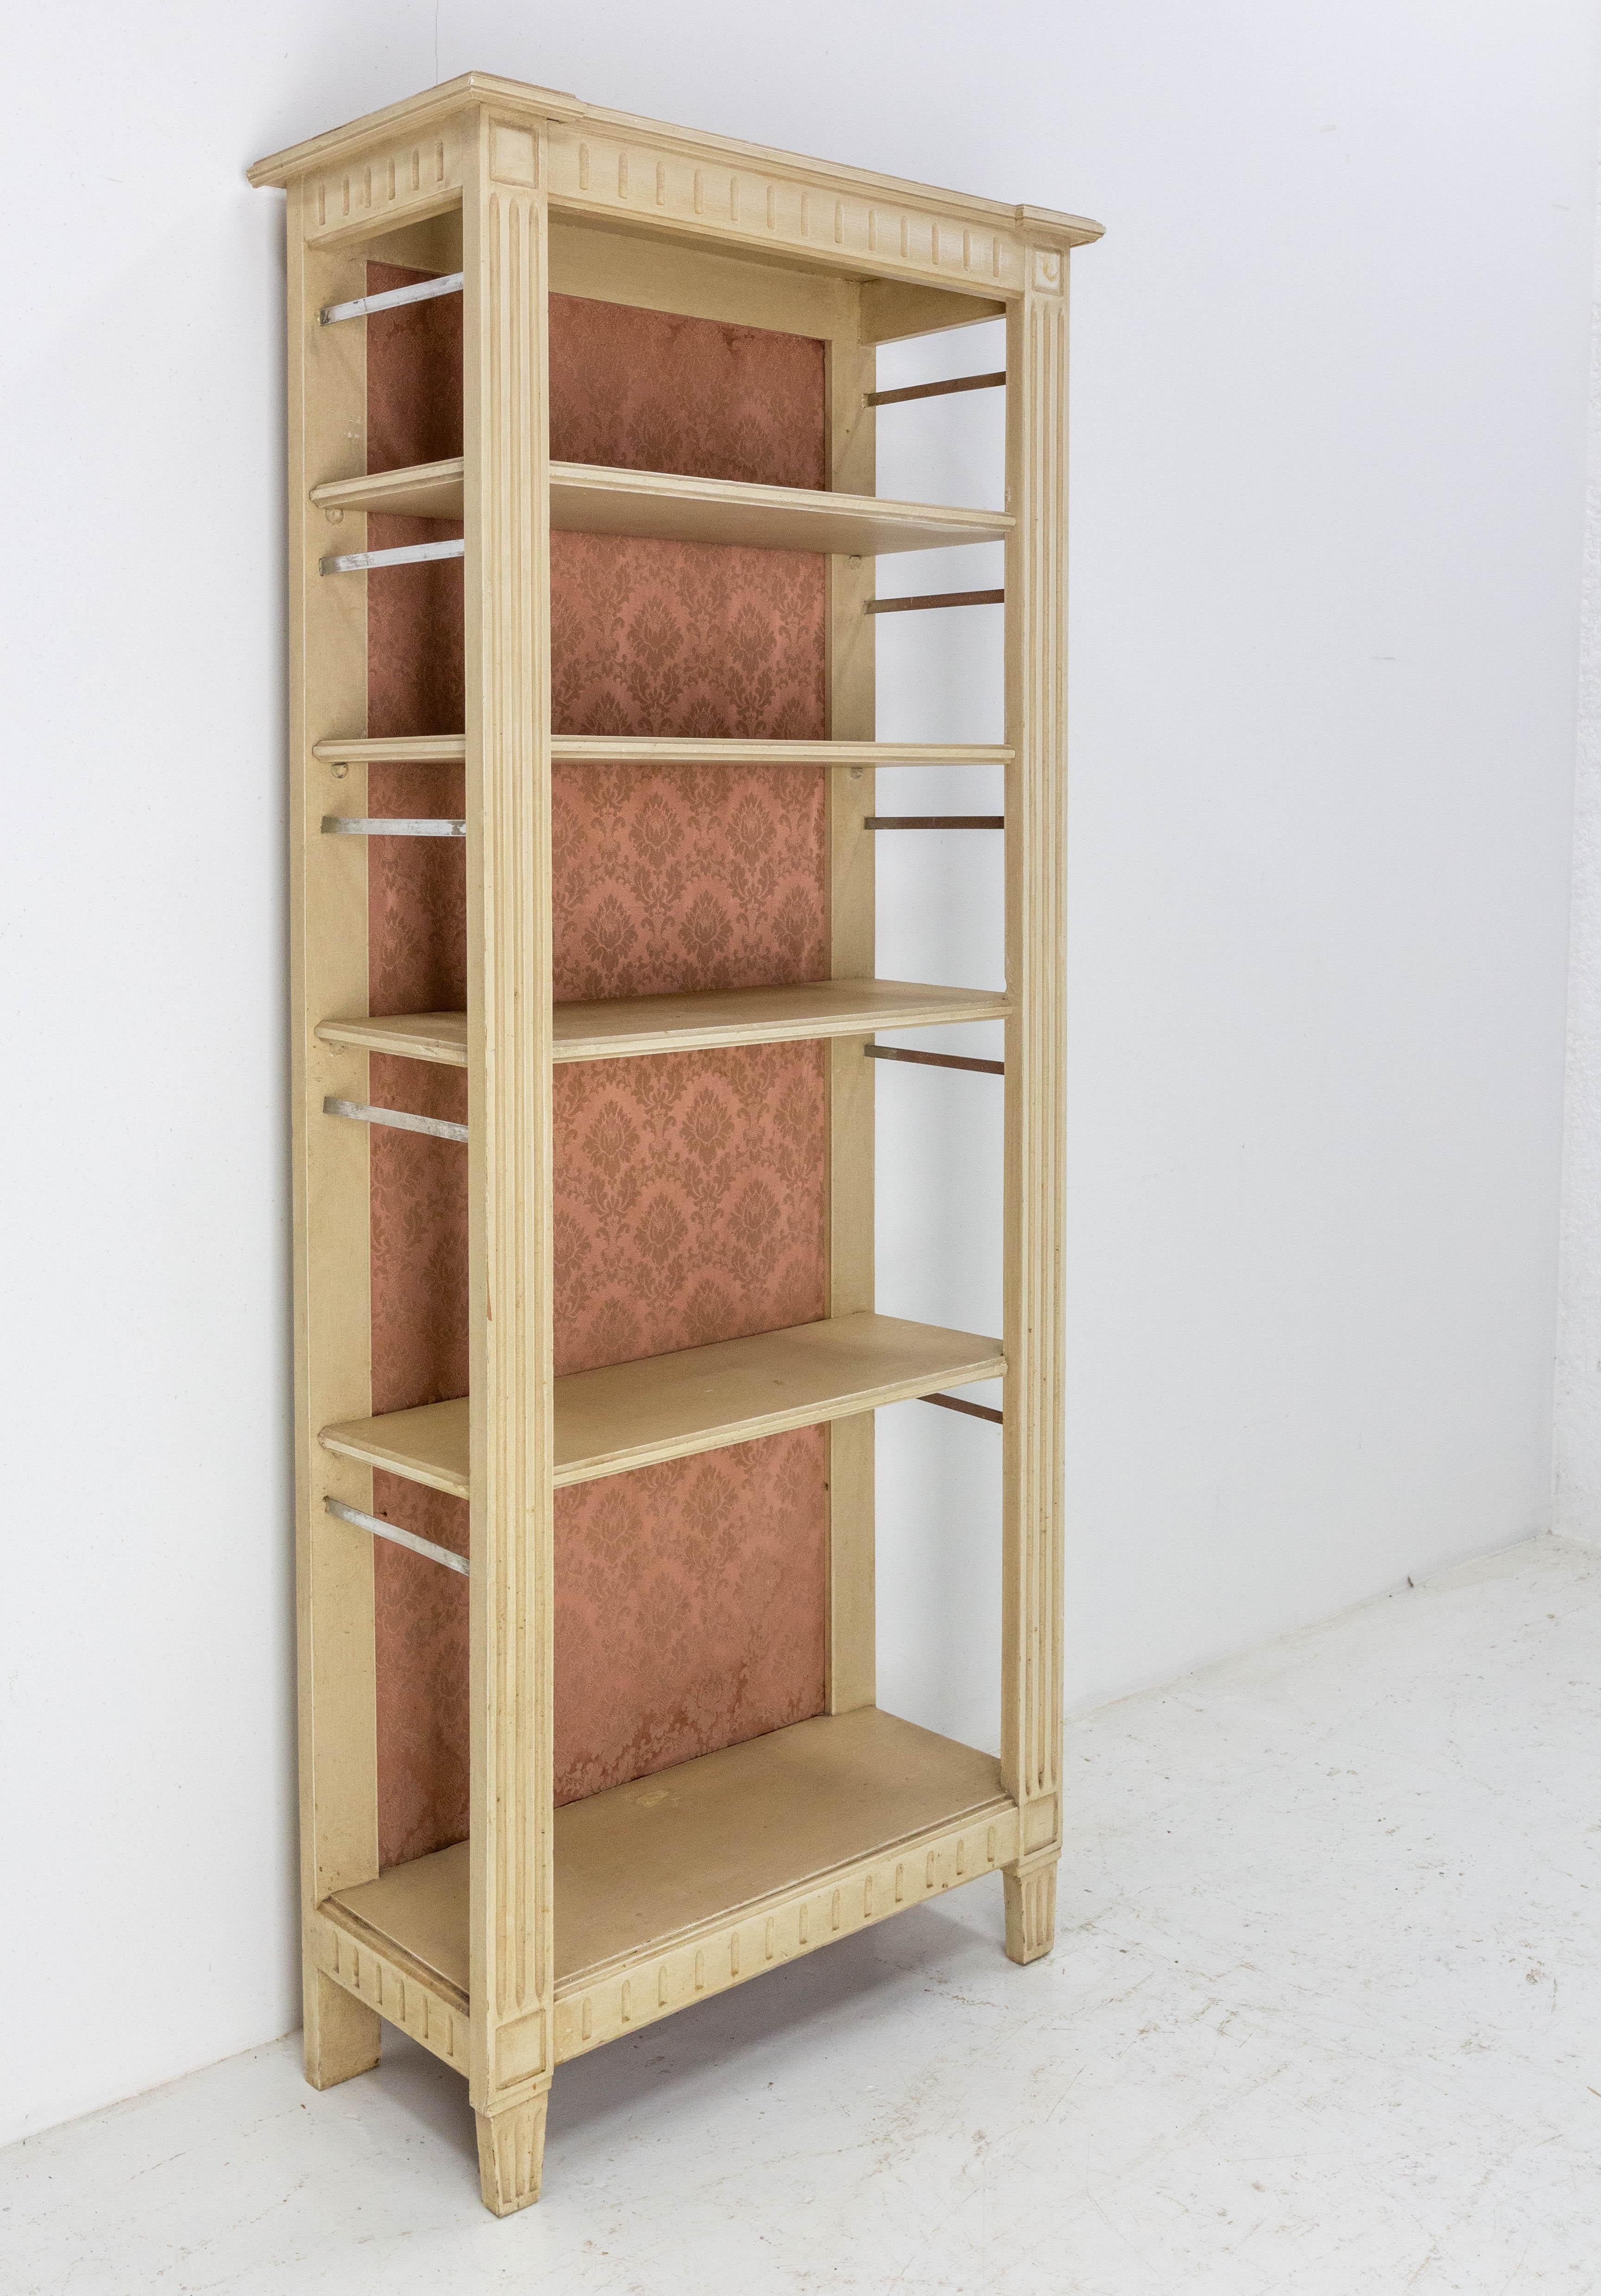 French bookcase or étagère in the Louis XVI style
Four shelves
Patinated
1960
Good condition

Shipping:
L65 P31 H151 17kg.
 